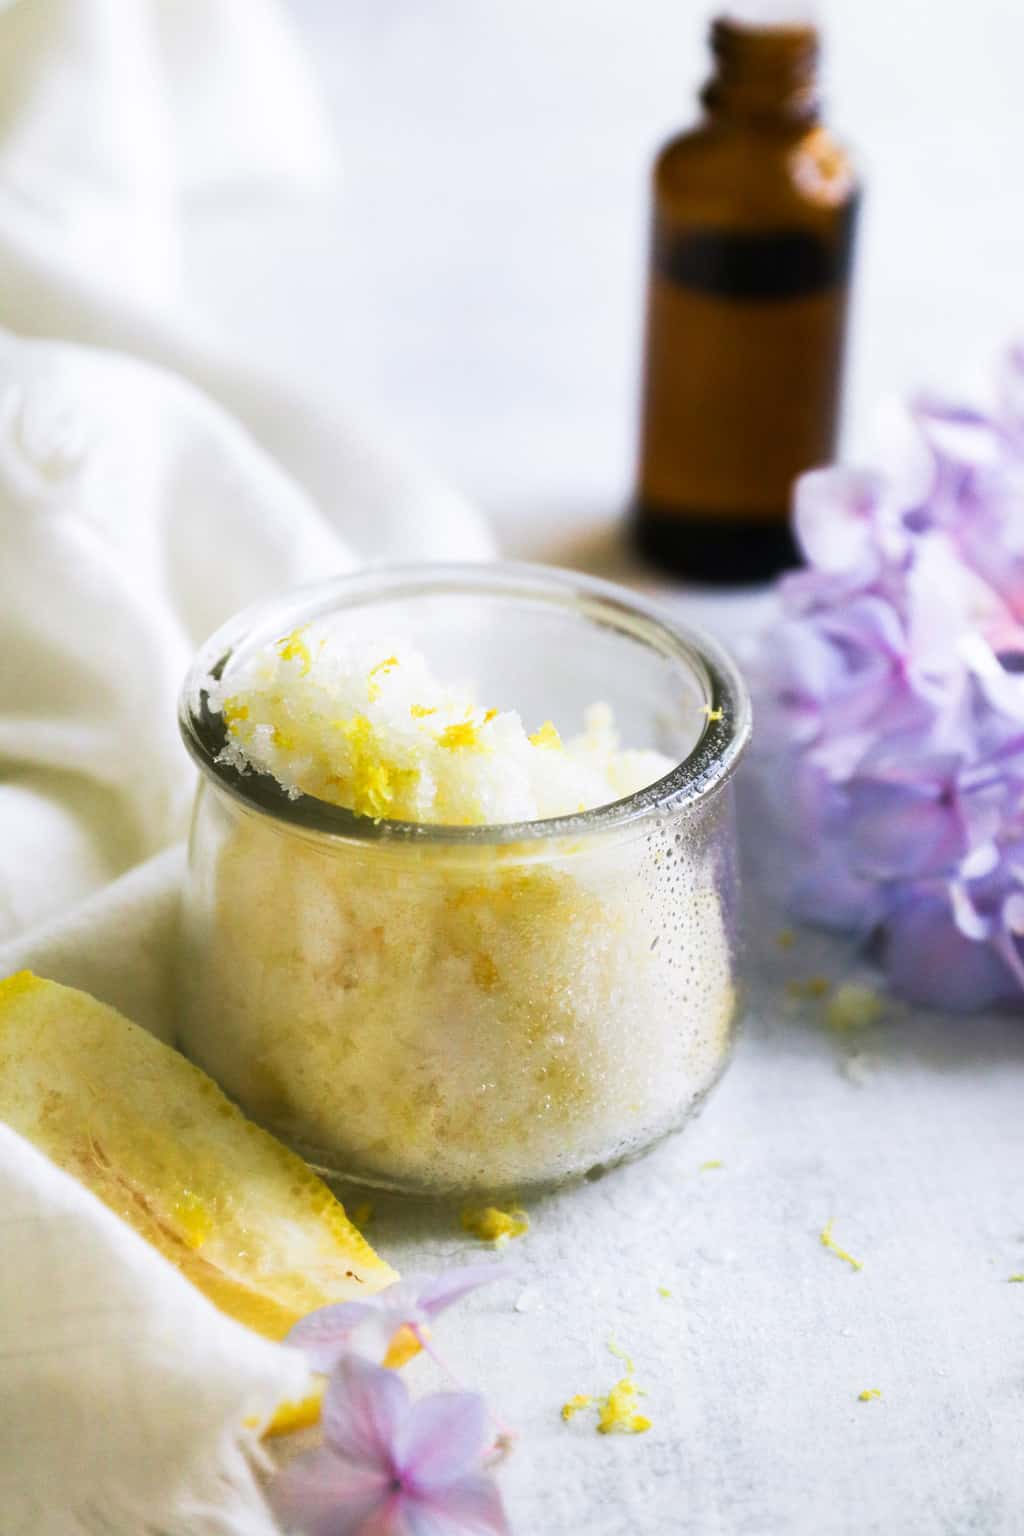 Make your own sugar scrub recipe at home with just two ingredients - sugar and oil - then add as many fun extras as you like!